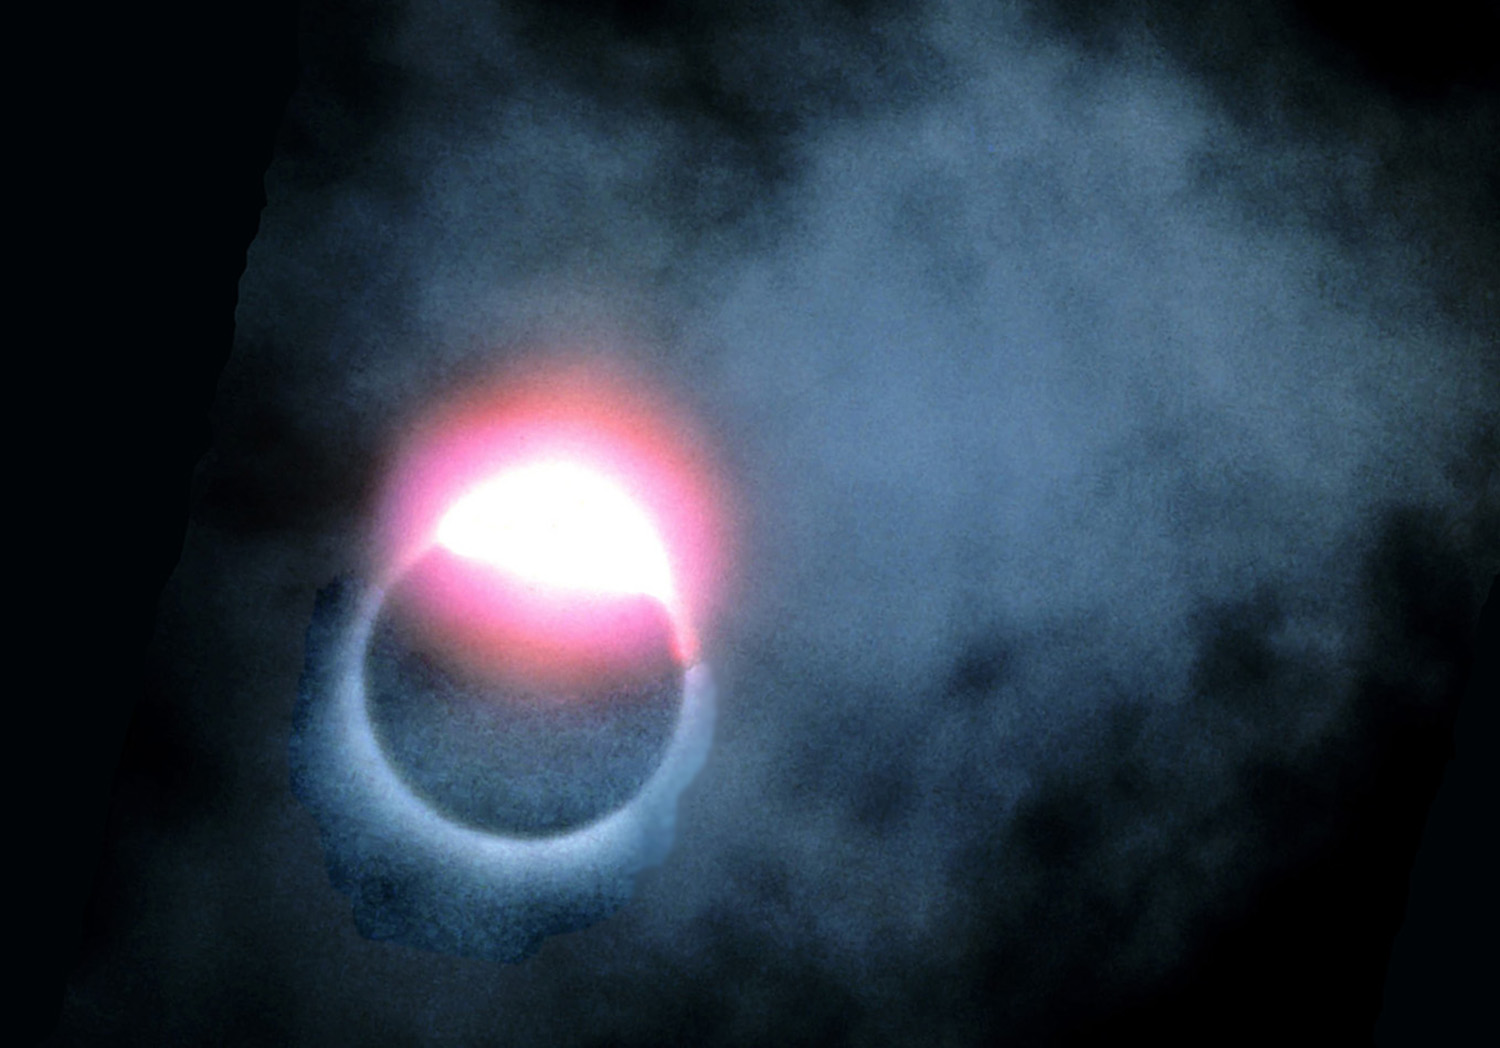 Eclipse 1977 - A42 - Diamond Ring and Clouds